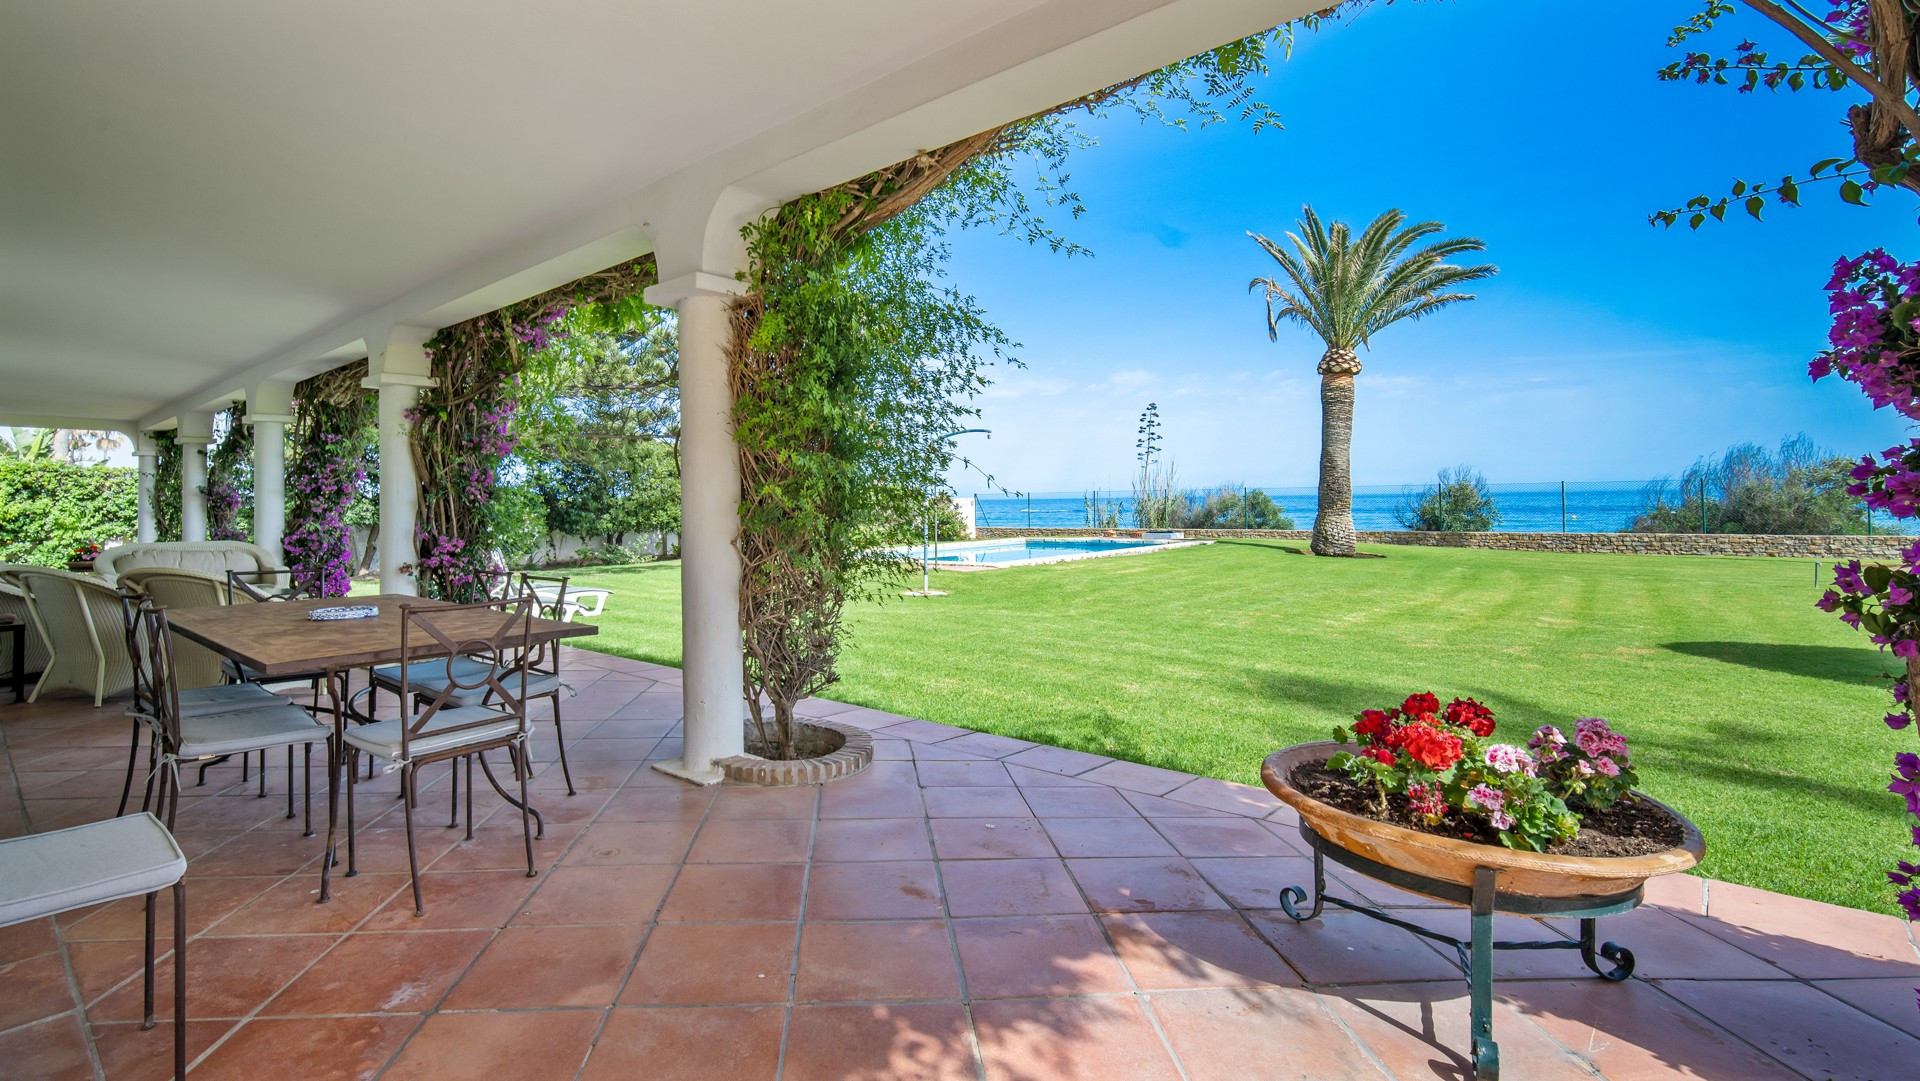 Frontline beach classical style villa with direct access to the beach and the Estepona promenade very private and quiet in a small gated community